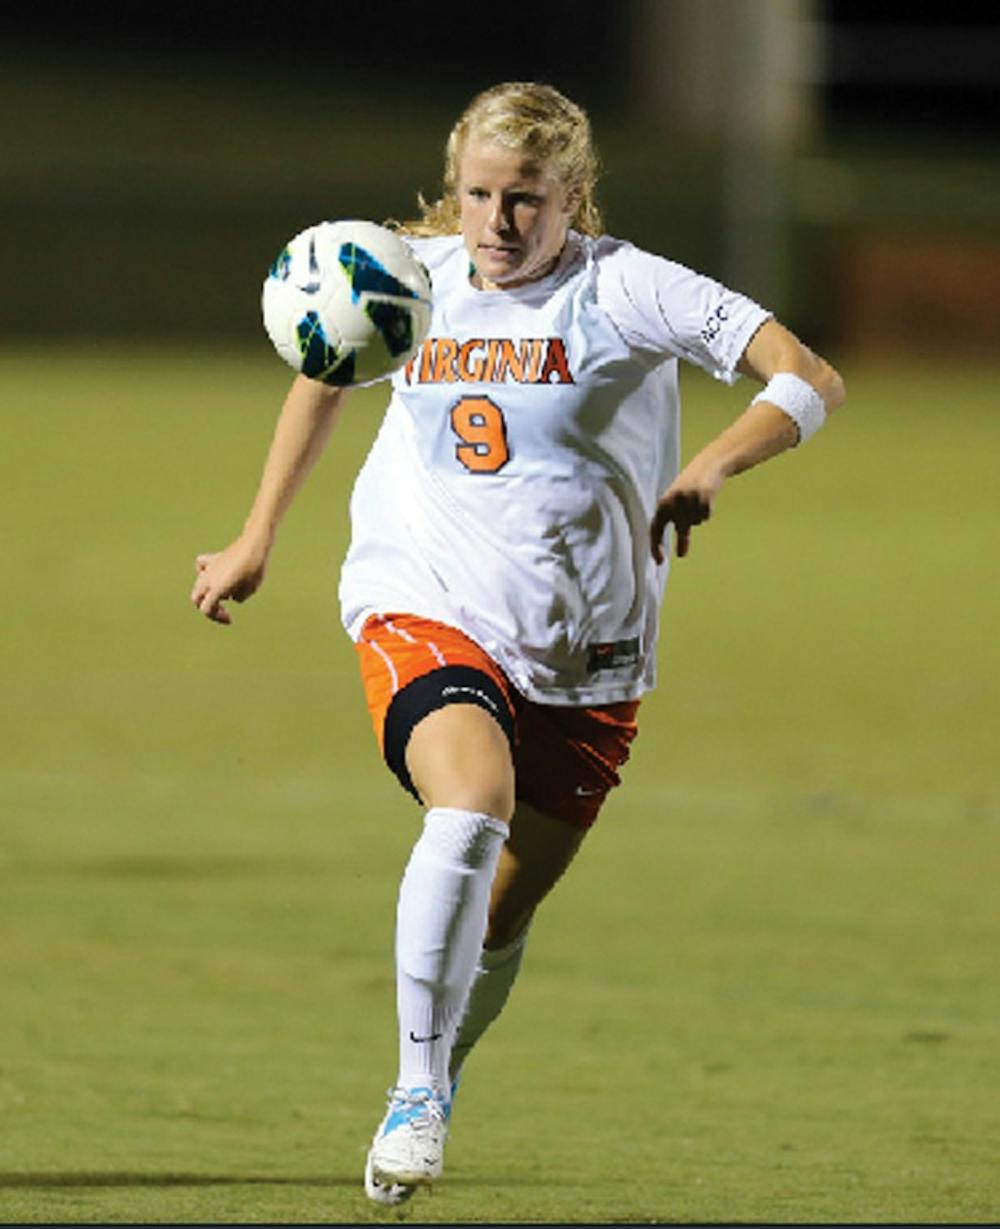 	Freshman Makenzy Doniak has added another dangerous weapon to the Virginia offense. The Chino Hills, California native was named the TopDrawerSoccer.com national Women’s College Player of the Week, becoming the third Cavalier to earn the award in school history.